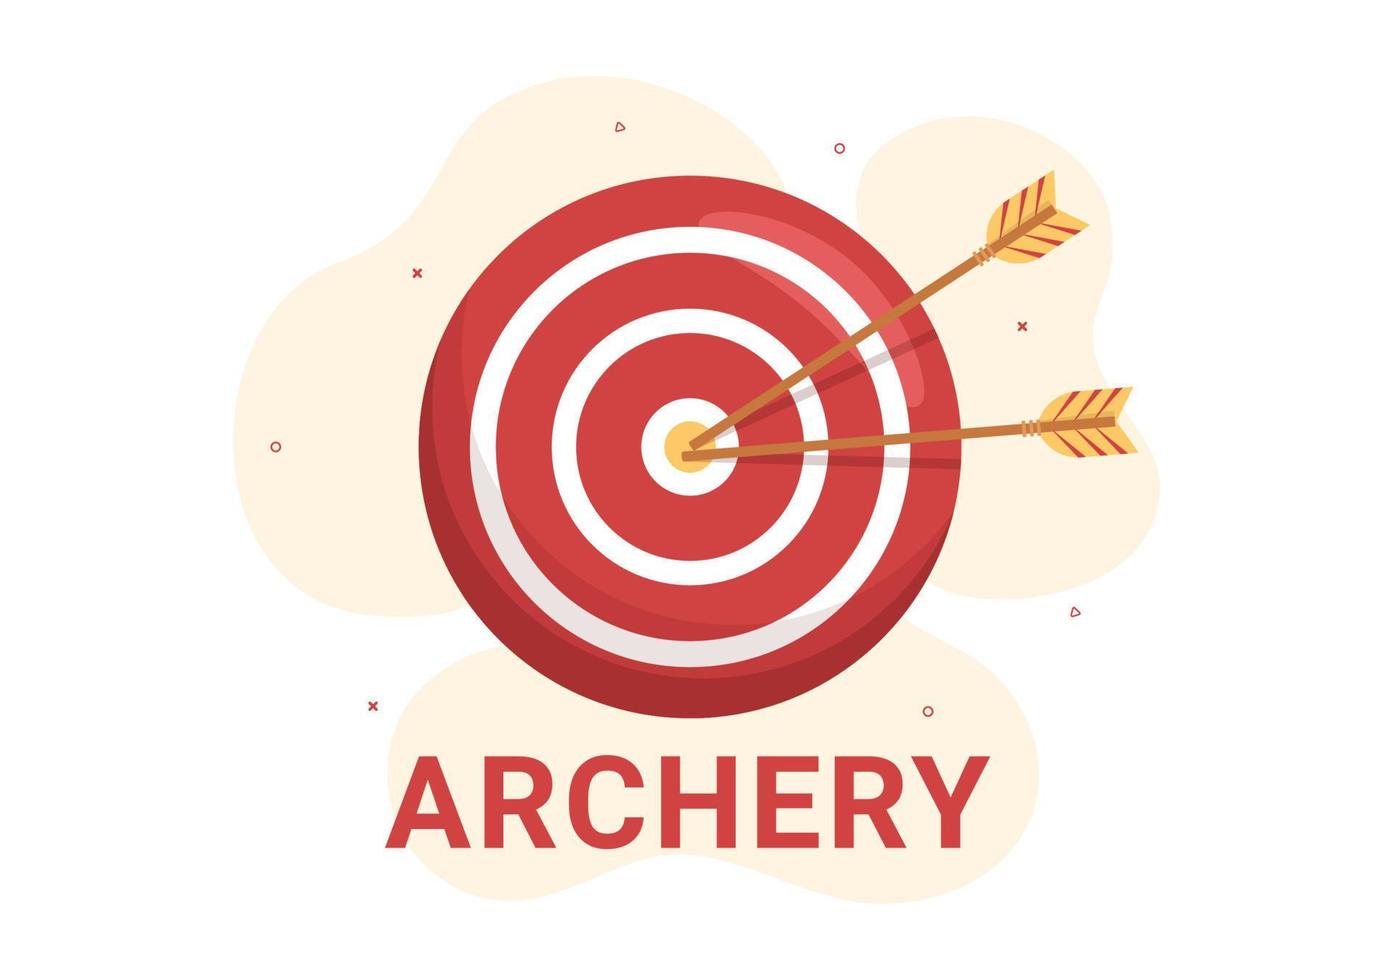 Archery Sport with Bow and Arrow Pointing at Target for Outdoor Recreational Activity in Flat Cartoon Hand Drawn Template Illustration vector